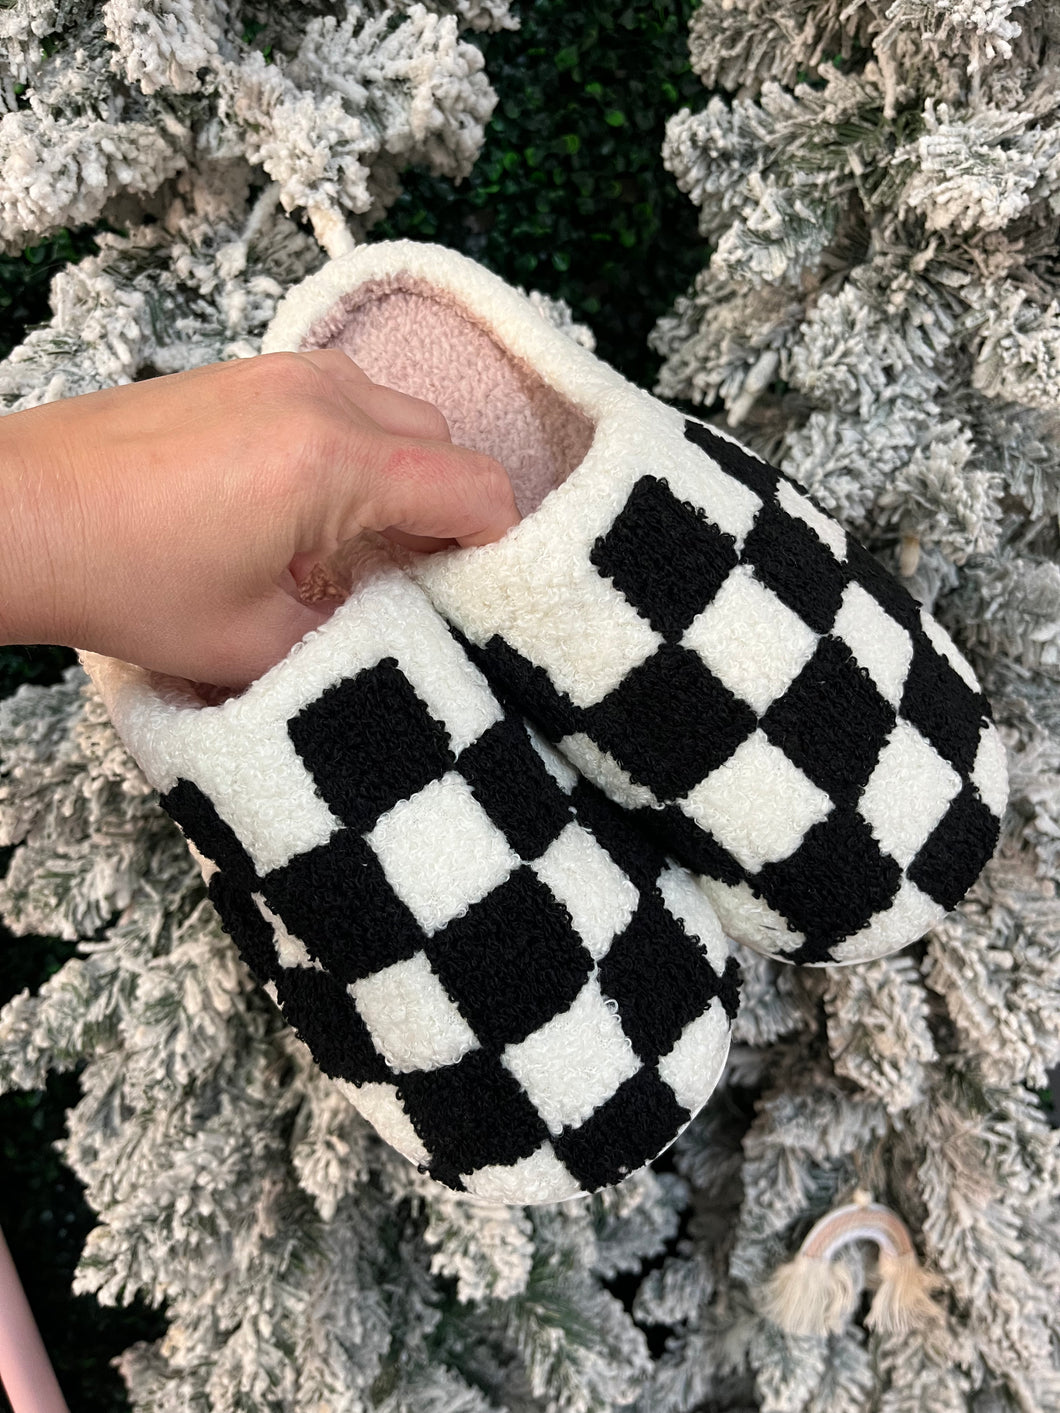 Black and white checkered slippers